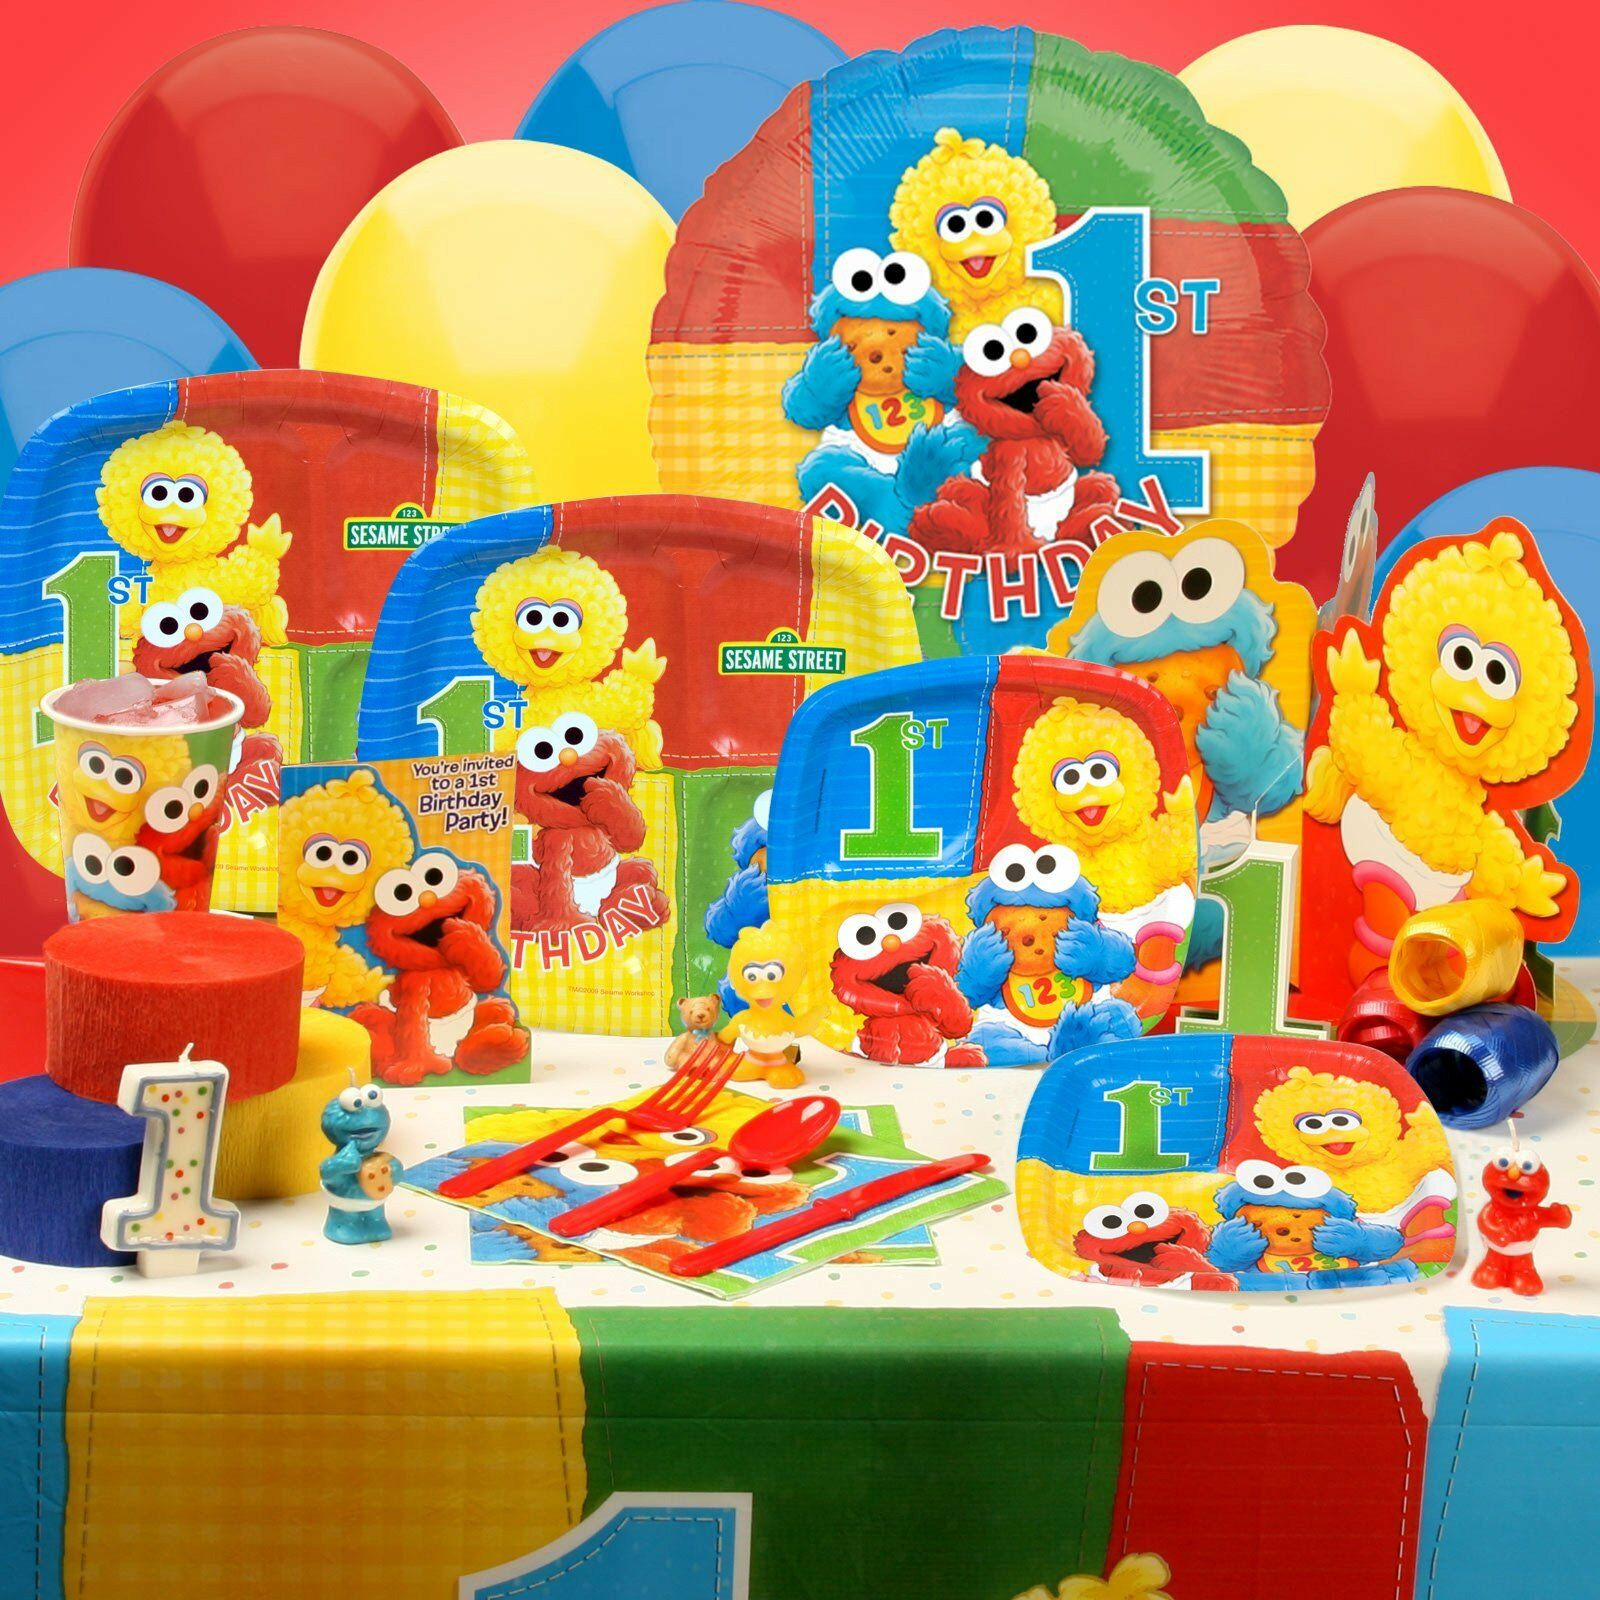 Sesame Street Birthday Party Supplies
 Party decorations deals on 1001 Blocks